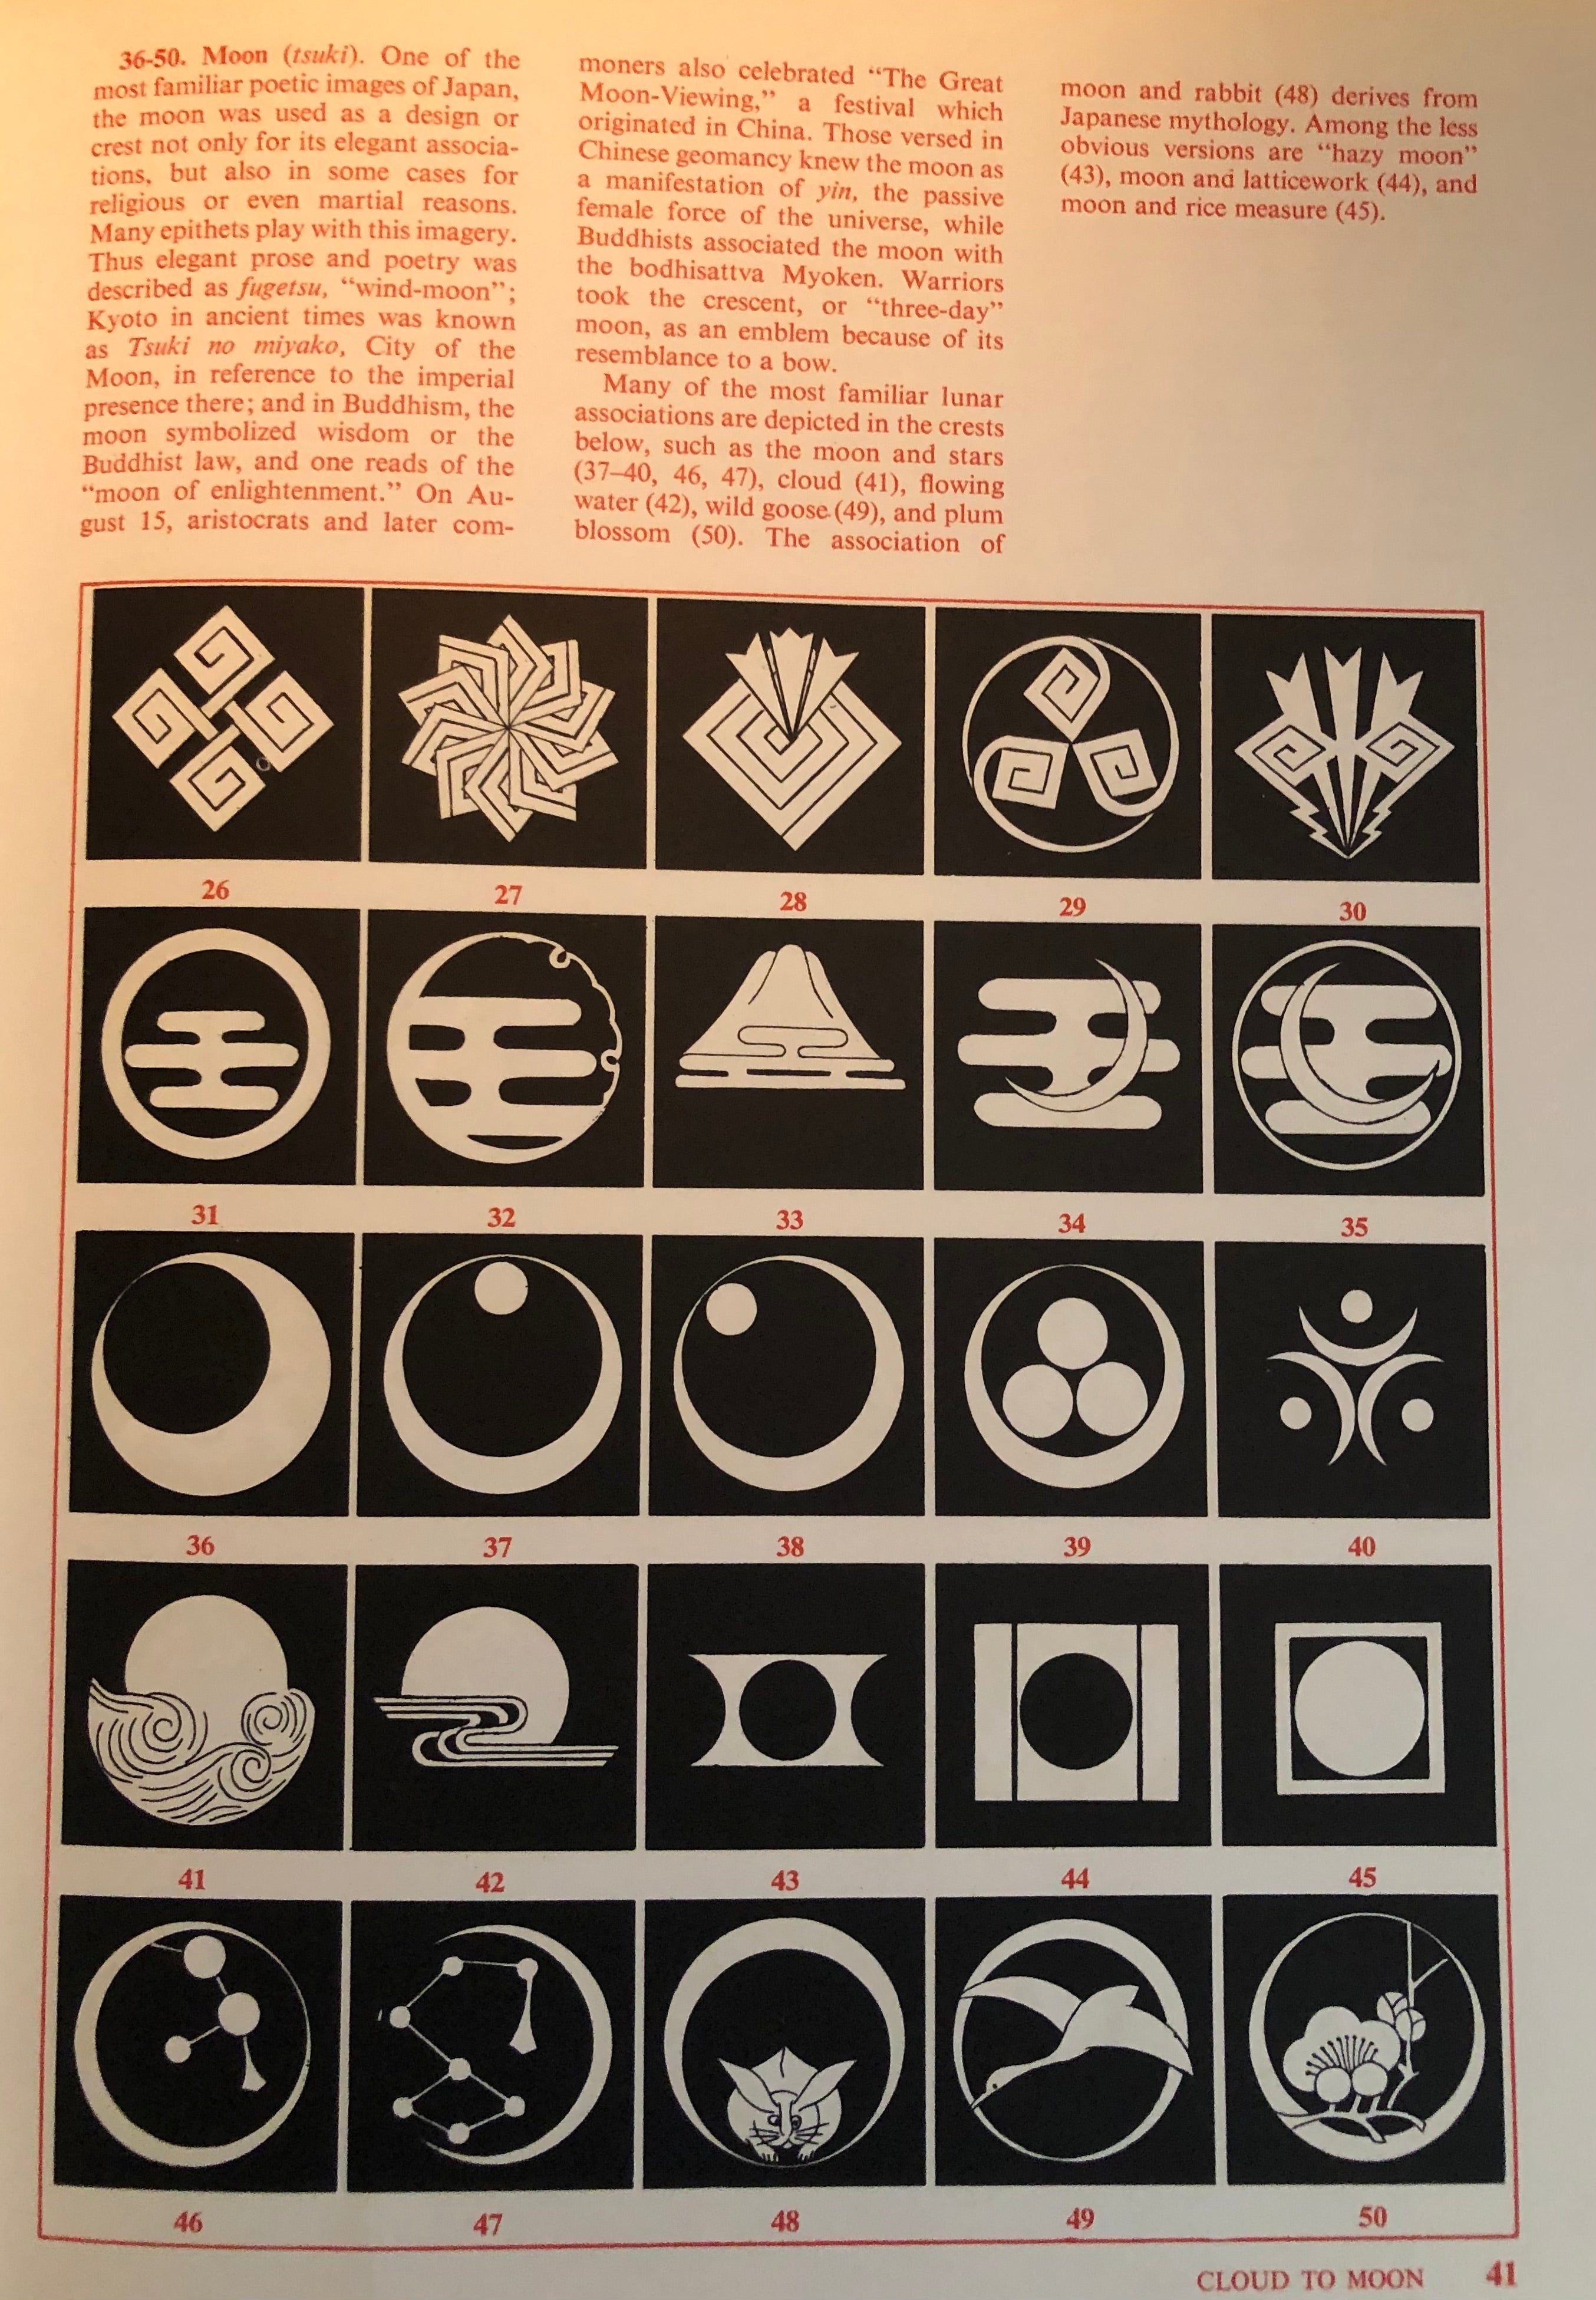 The Elements of Japanese Design by John W. Dower